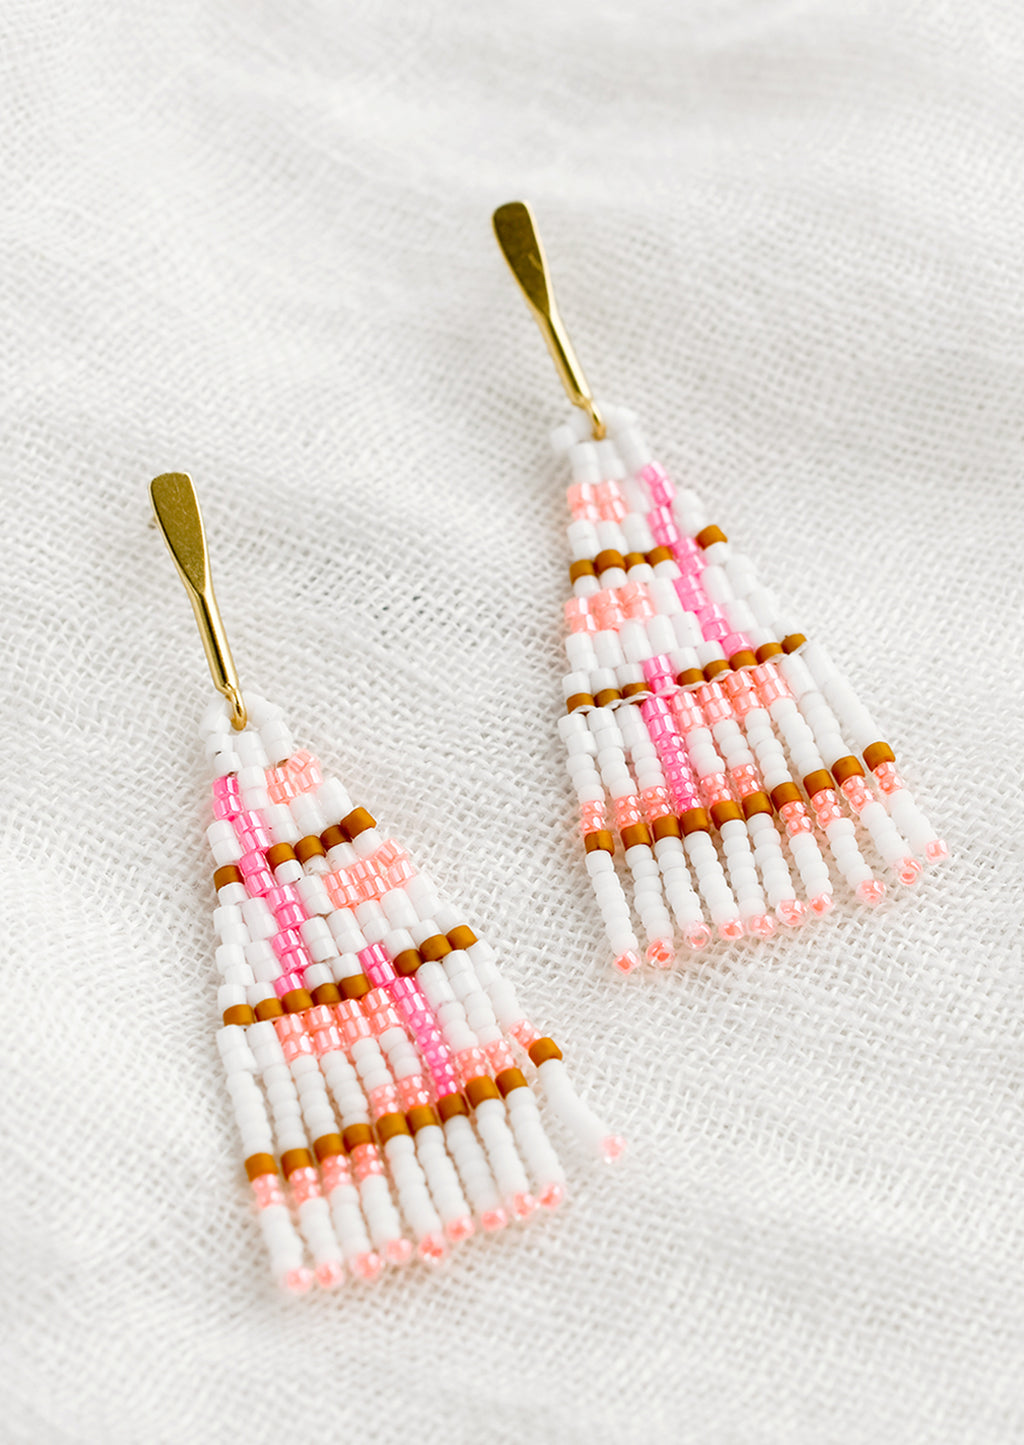 Neon White Multi: A pair of beaded earrings in white and neon pink colorway.